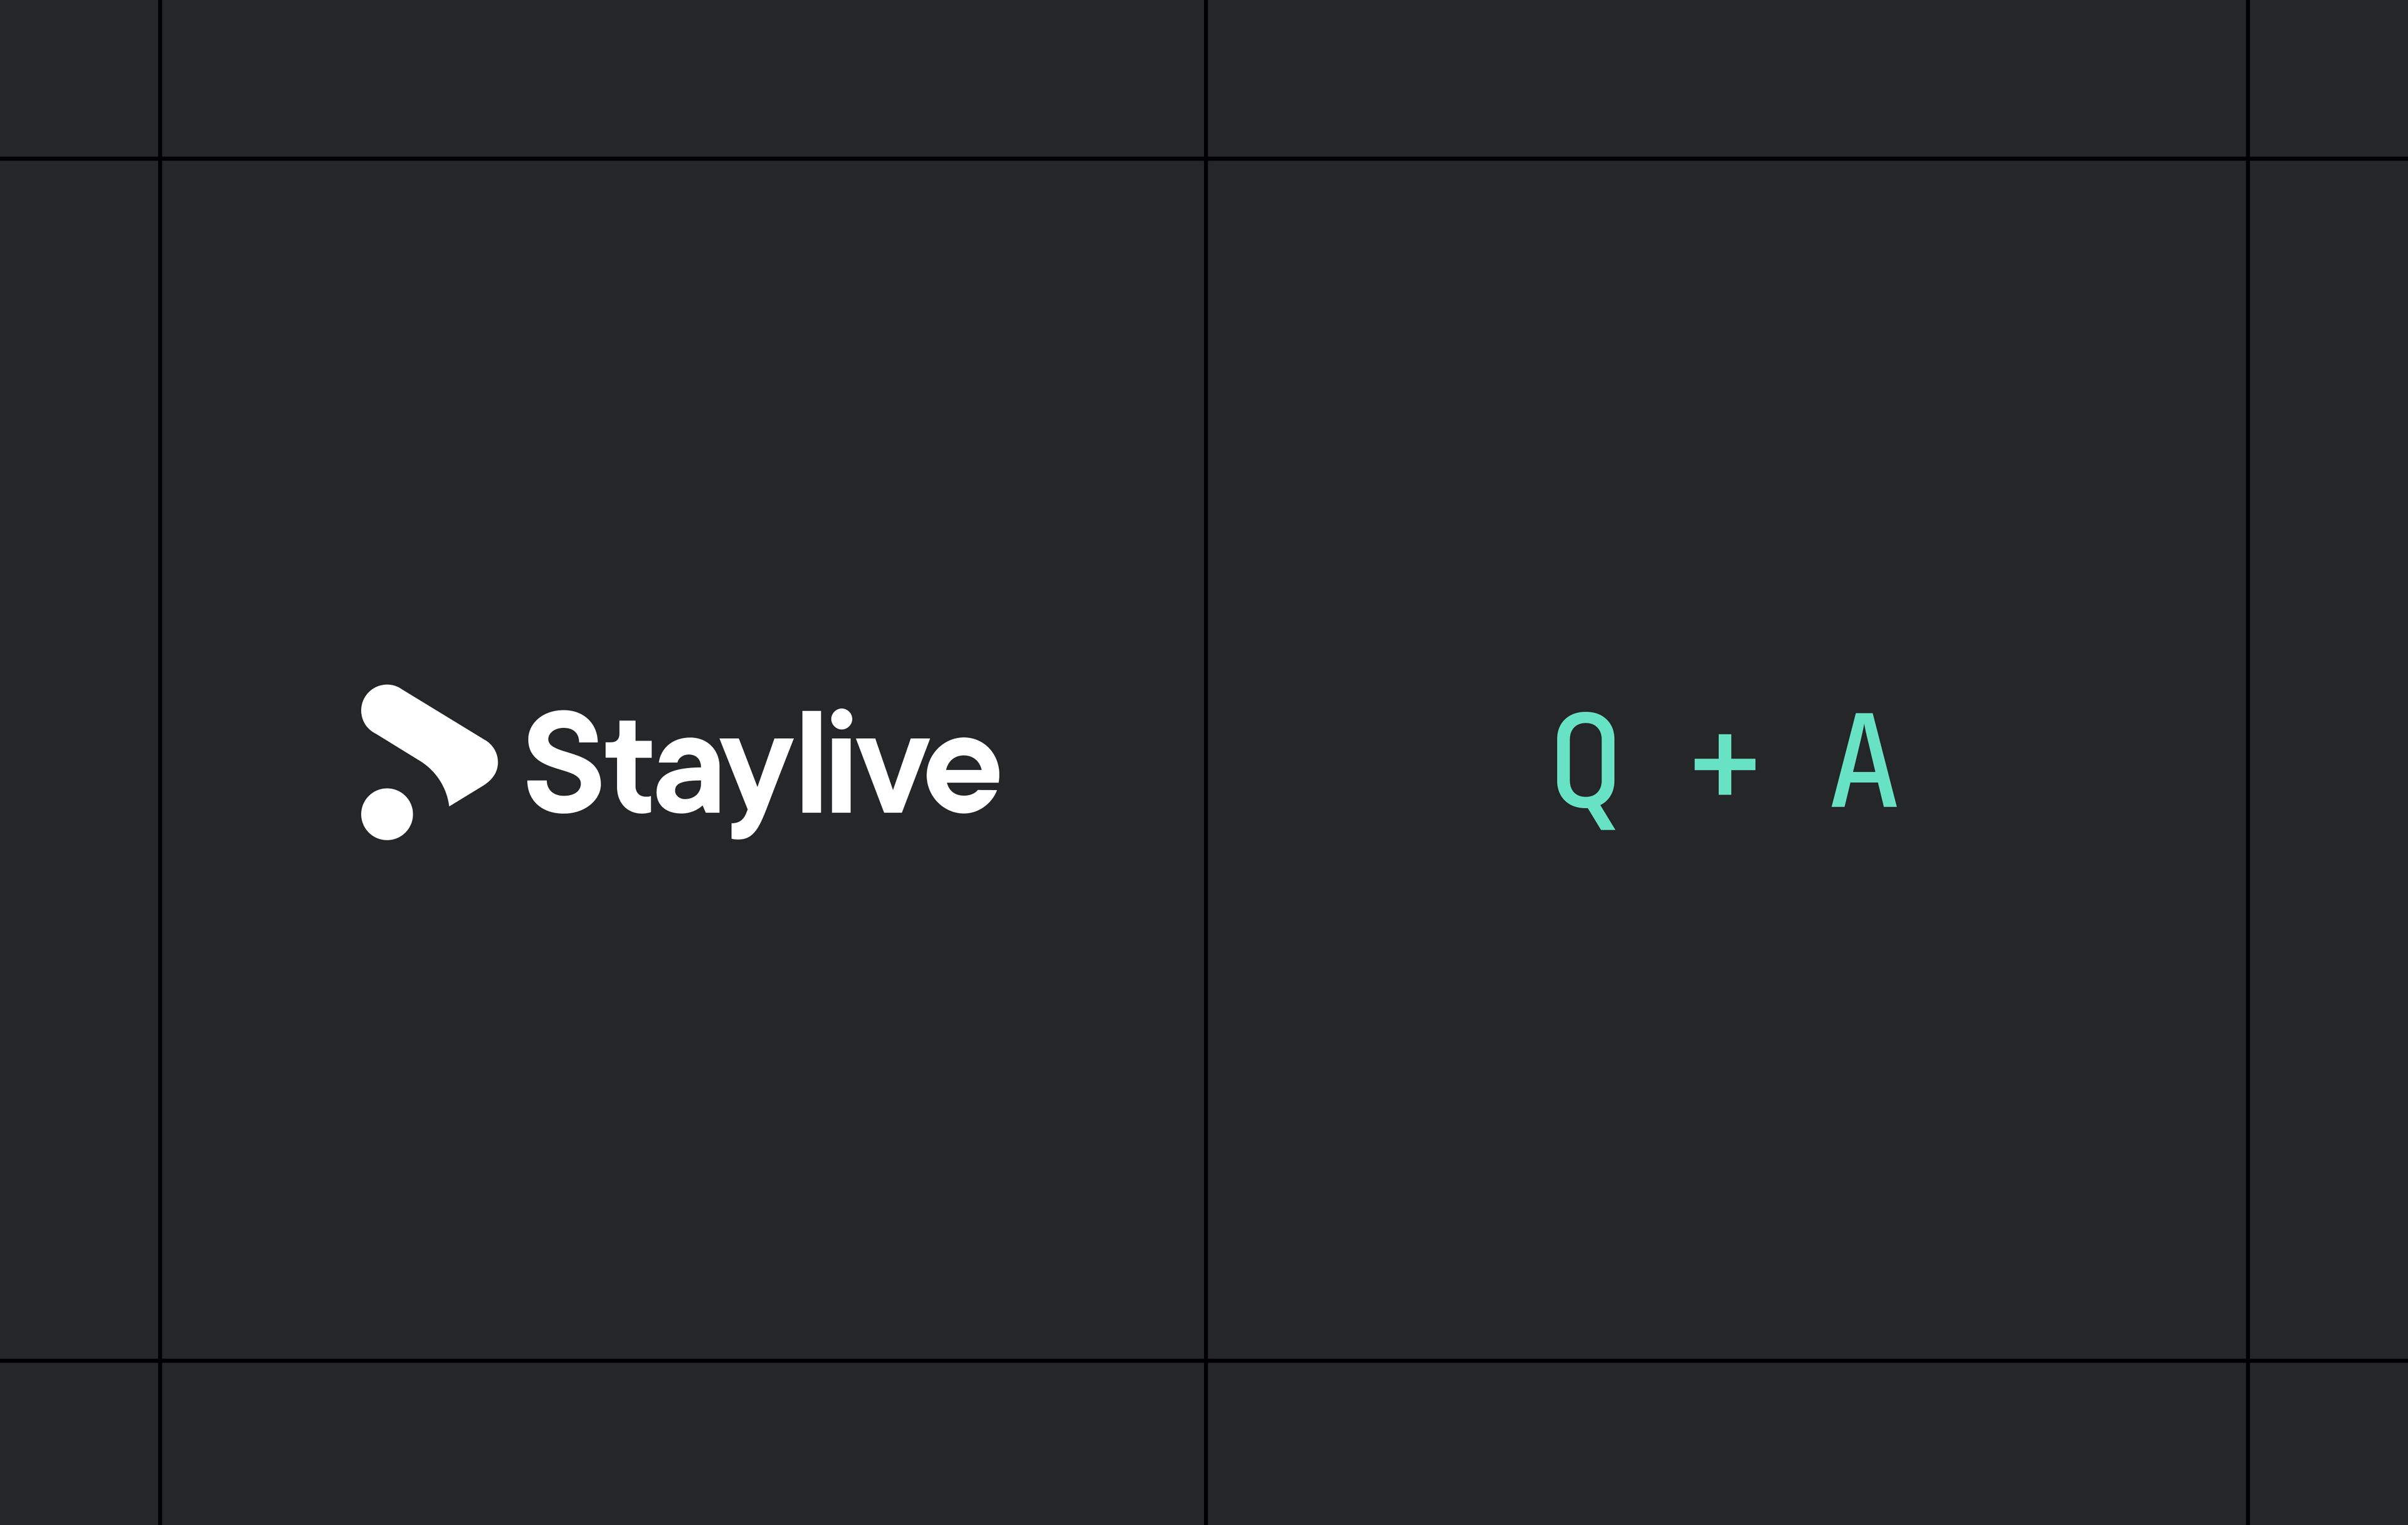 Staylive's logo next to Q+A